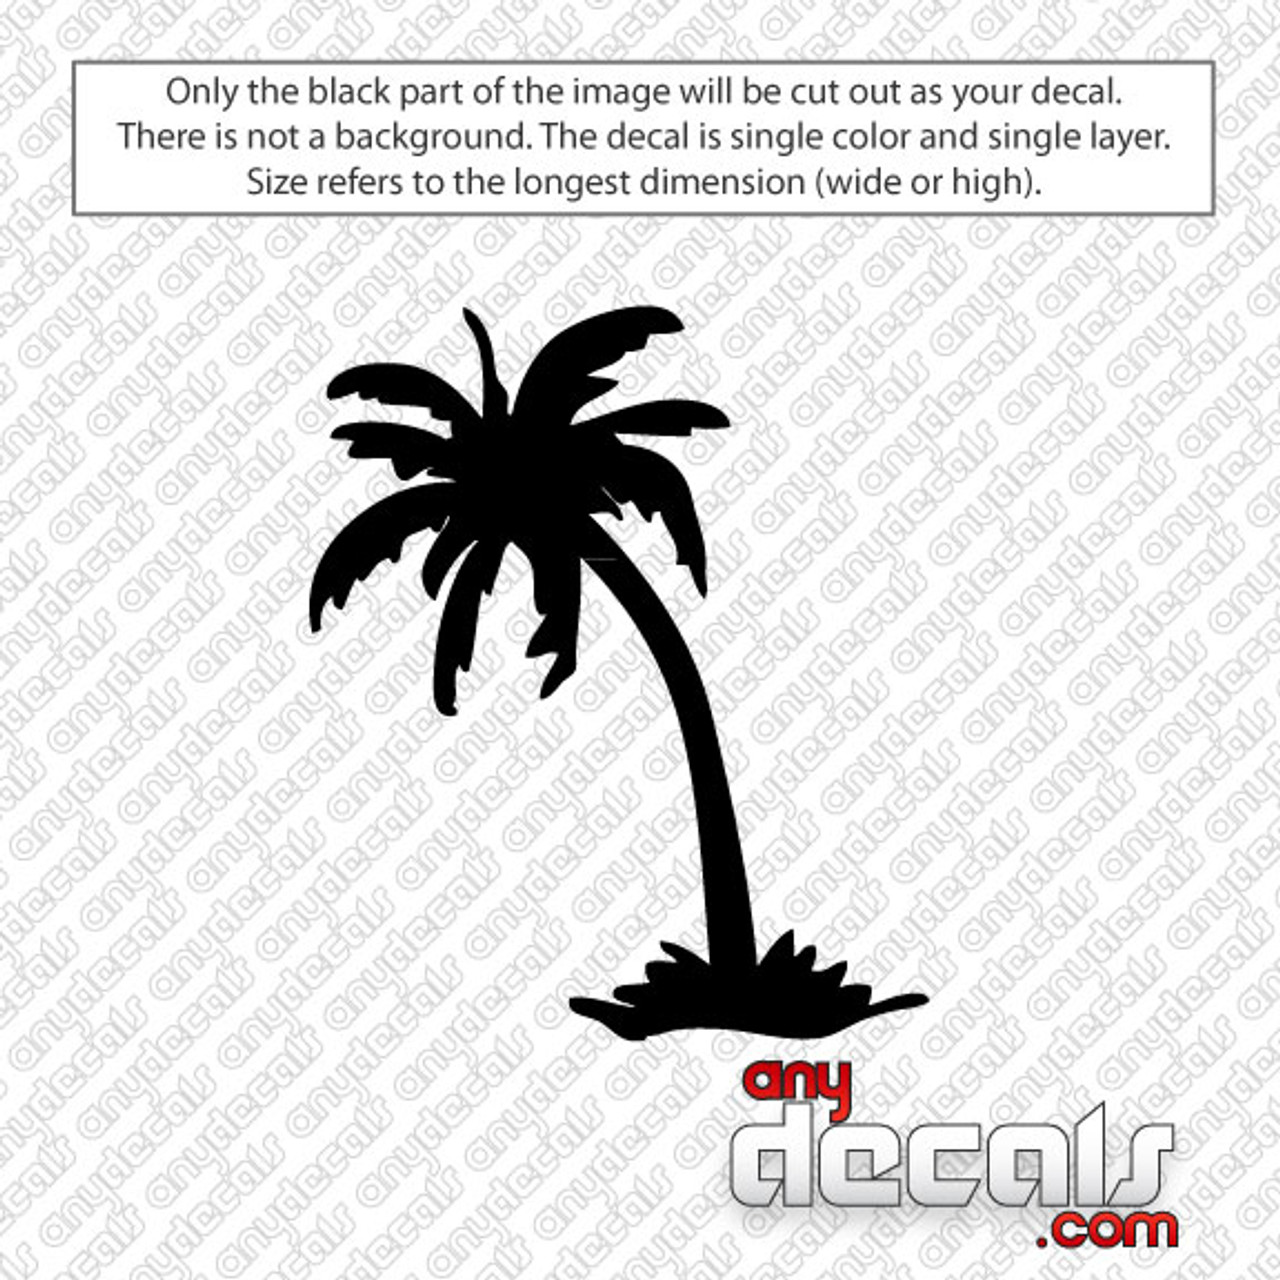 Car Decals - Car Stickers, Leaning Palm Tree Car Decals